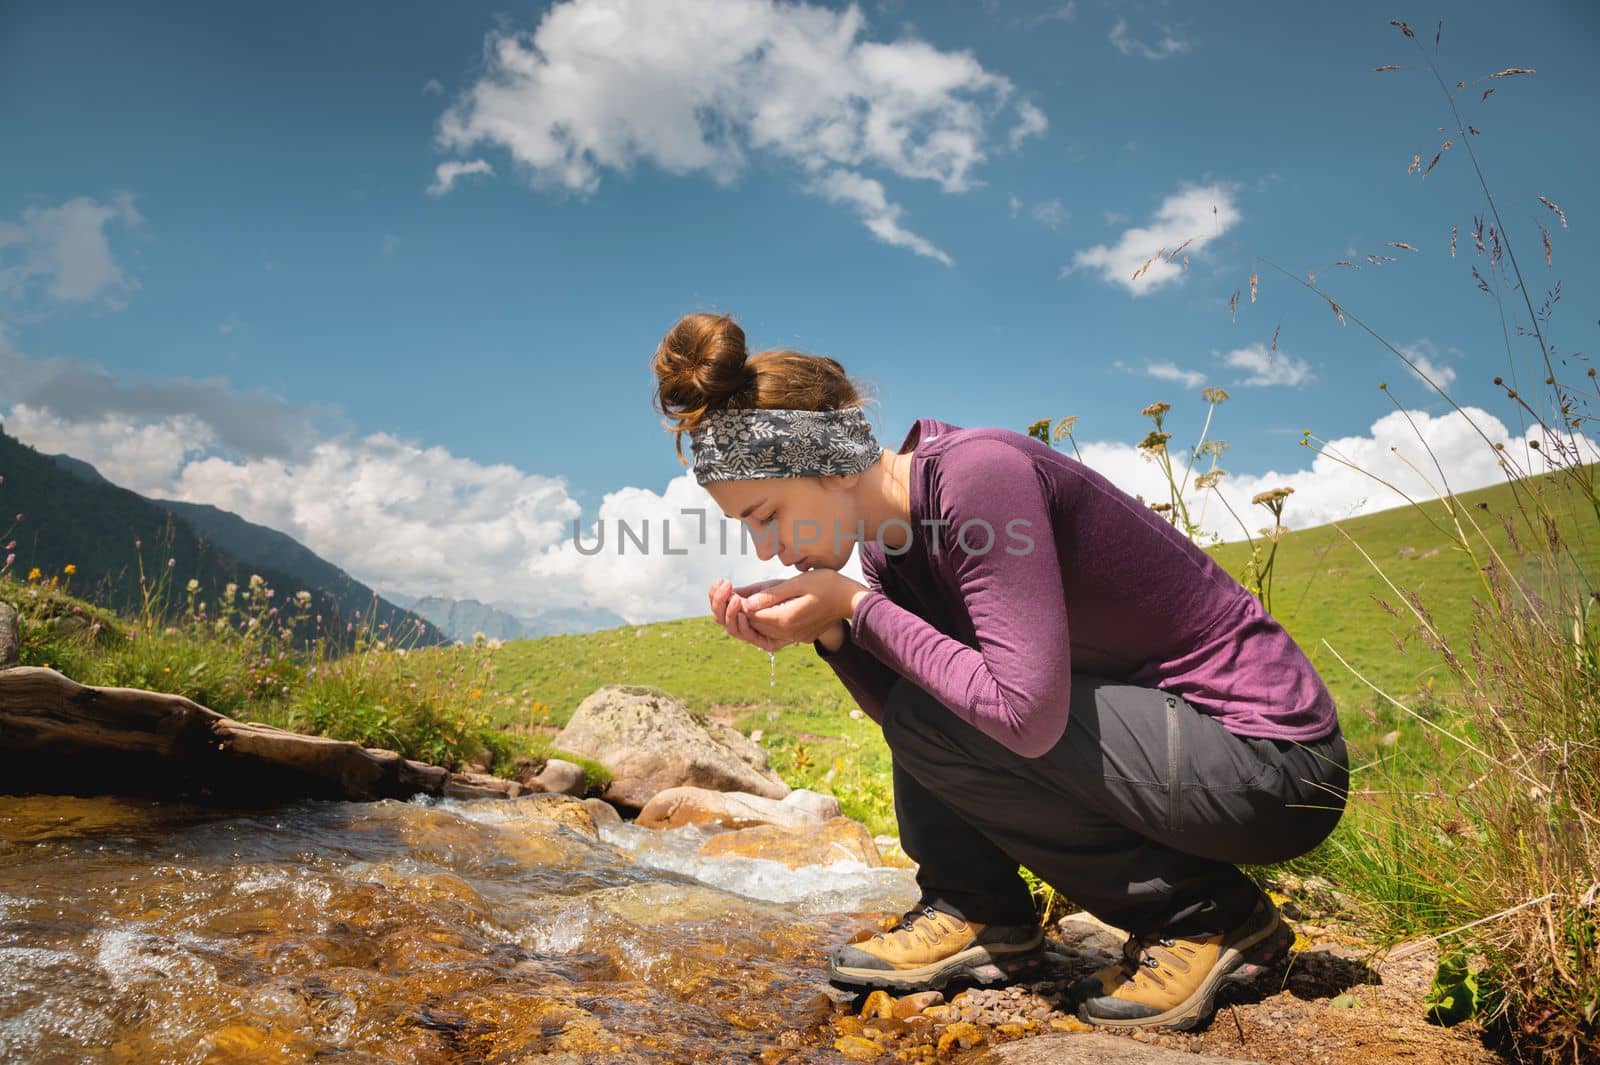 A woman tourist takes water in the river after a walk. Happy girl smiling while enjoying summer holidays outdoors in the mountains.